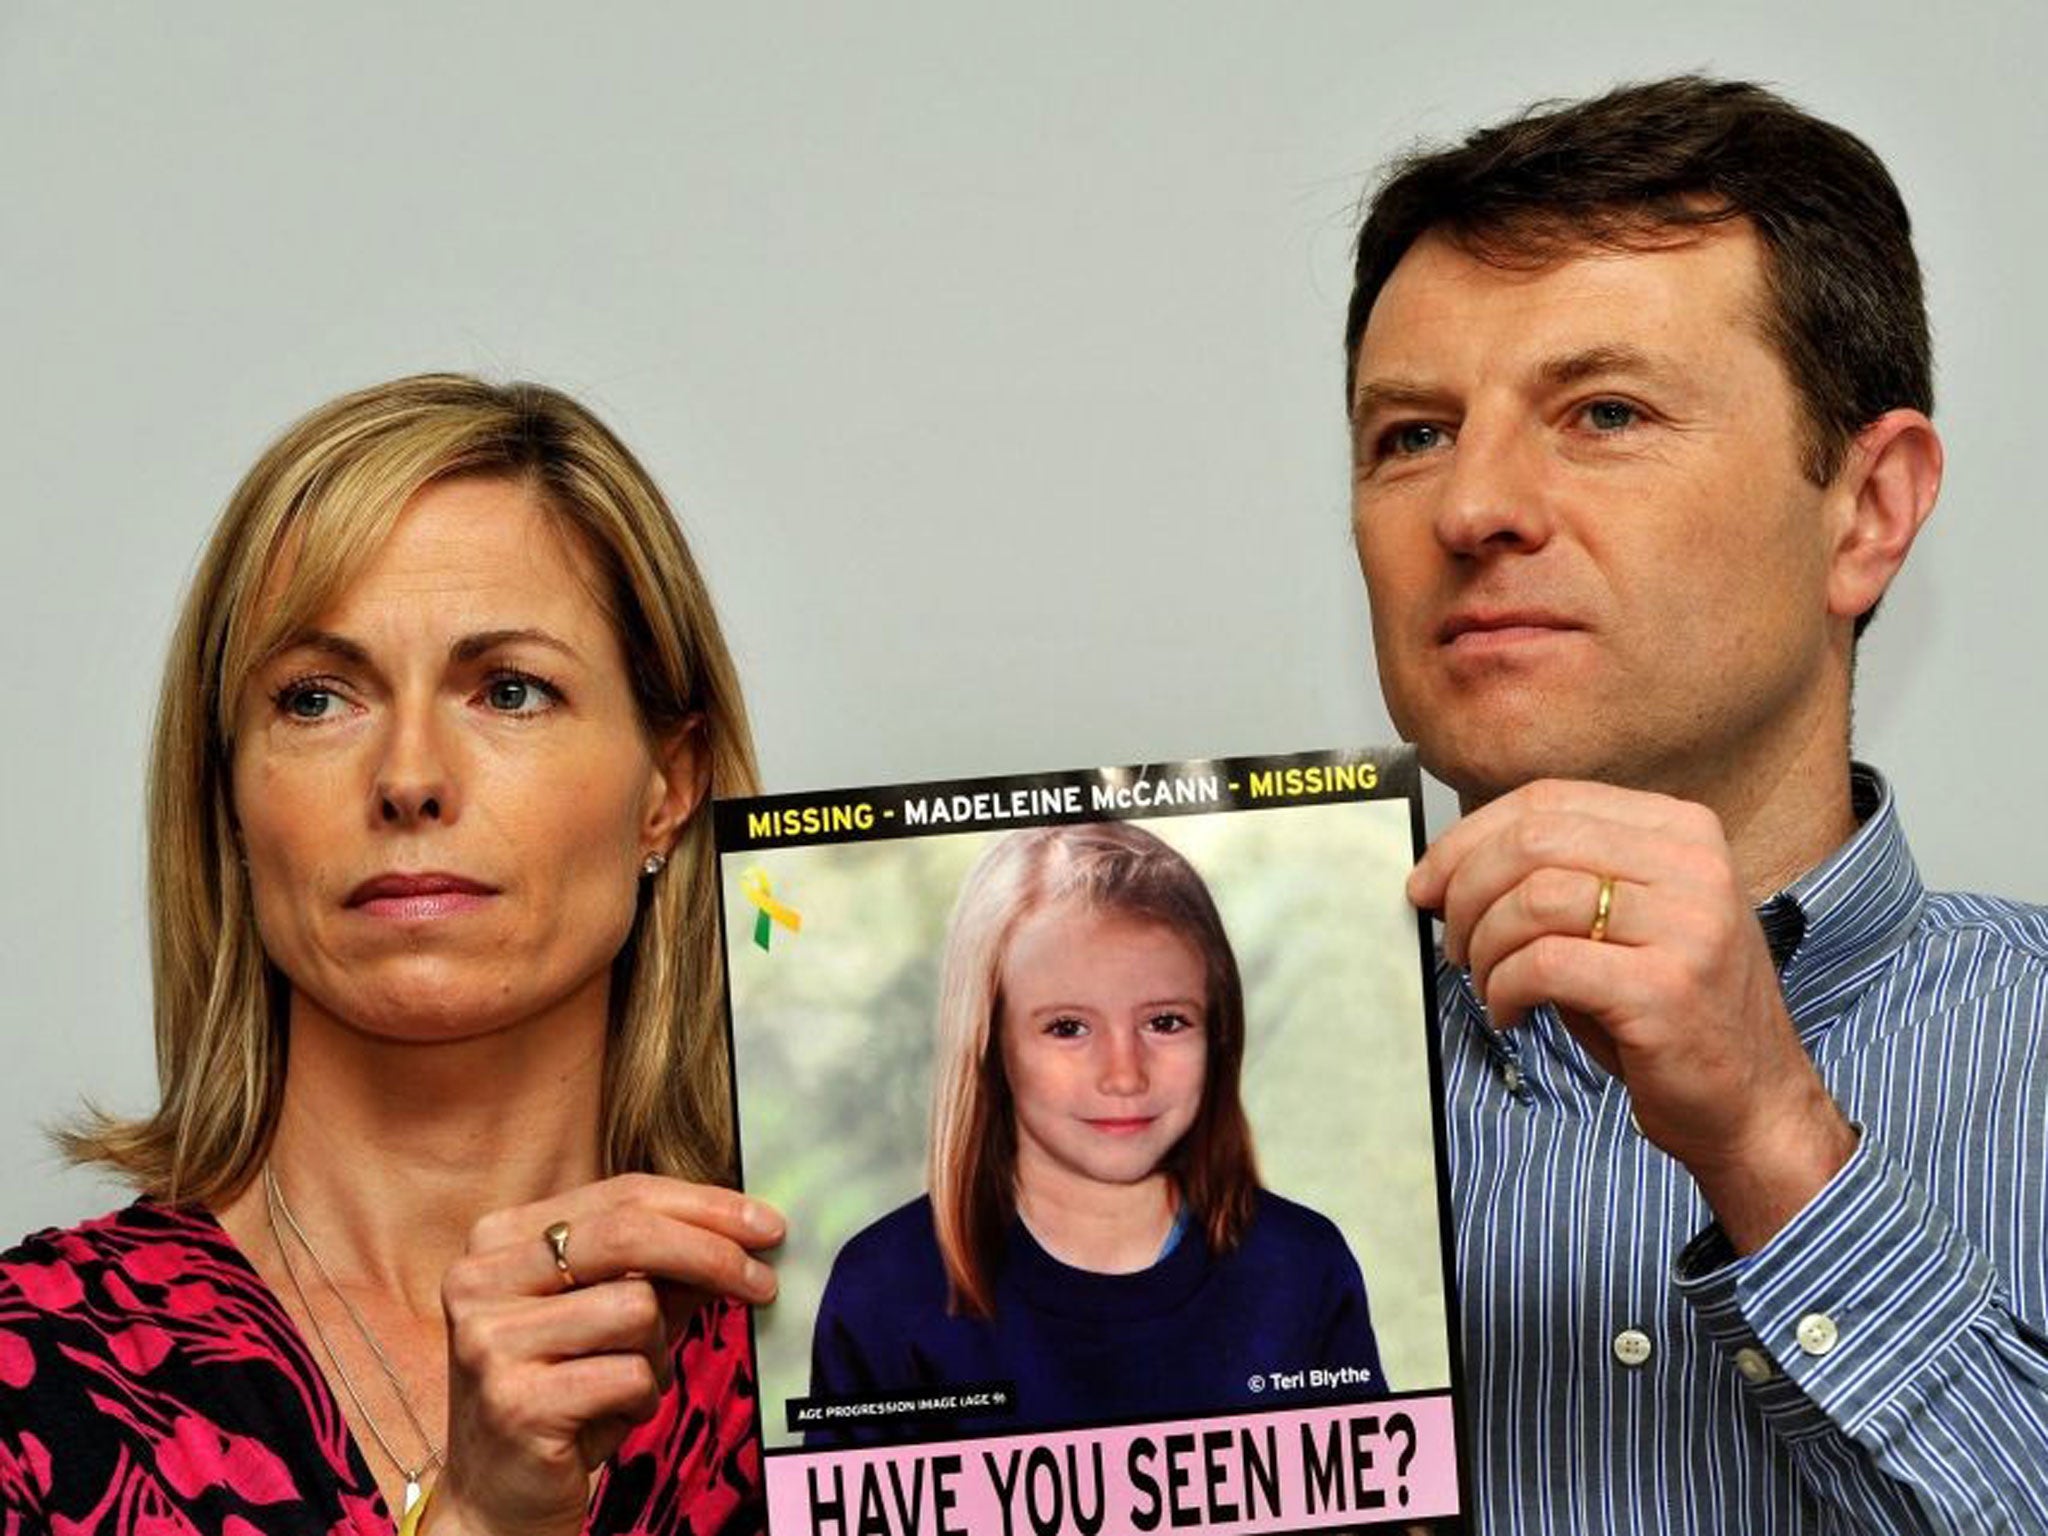 The parents of missing Madeleine McCann have described as "pure speculation" reports in the Portuguese press suggesting that a chief suspect in the disappearance of their daughter was killed in a tractor accident four years ago.